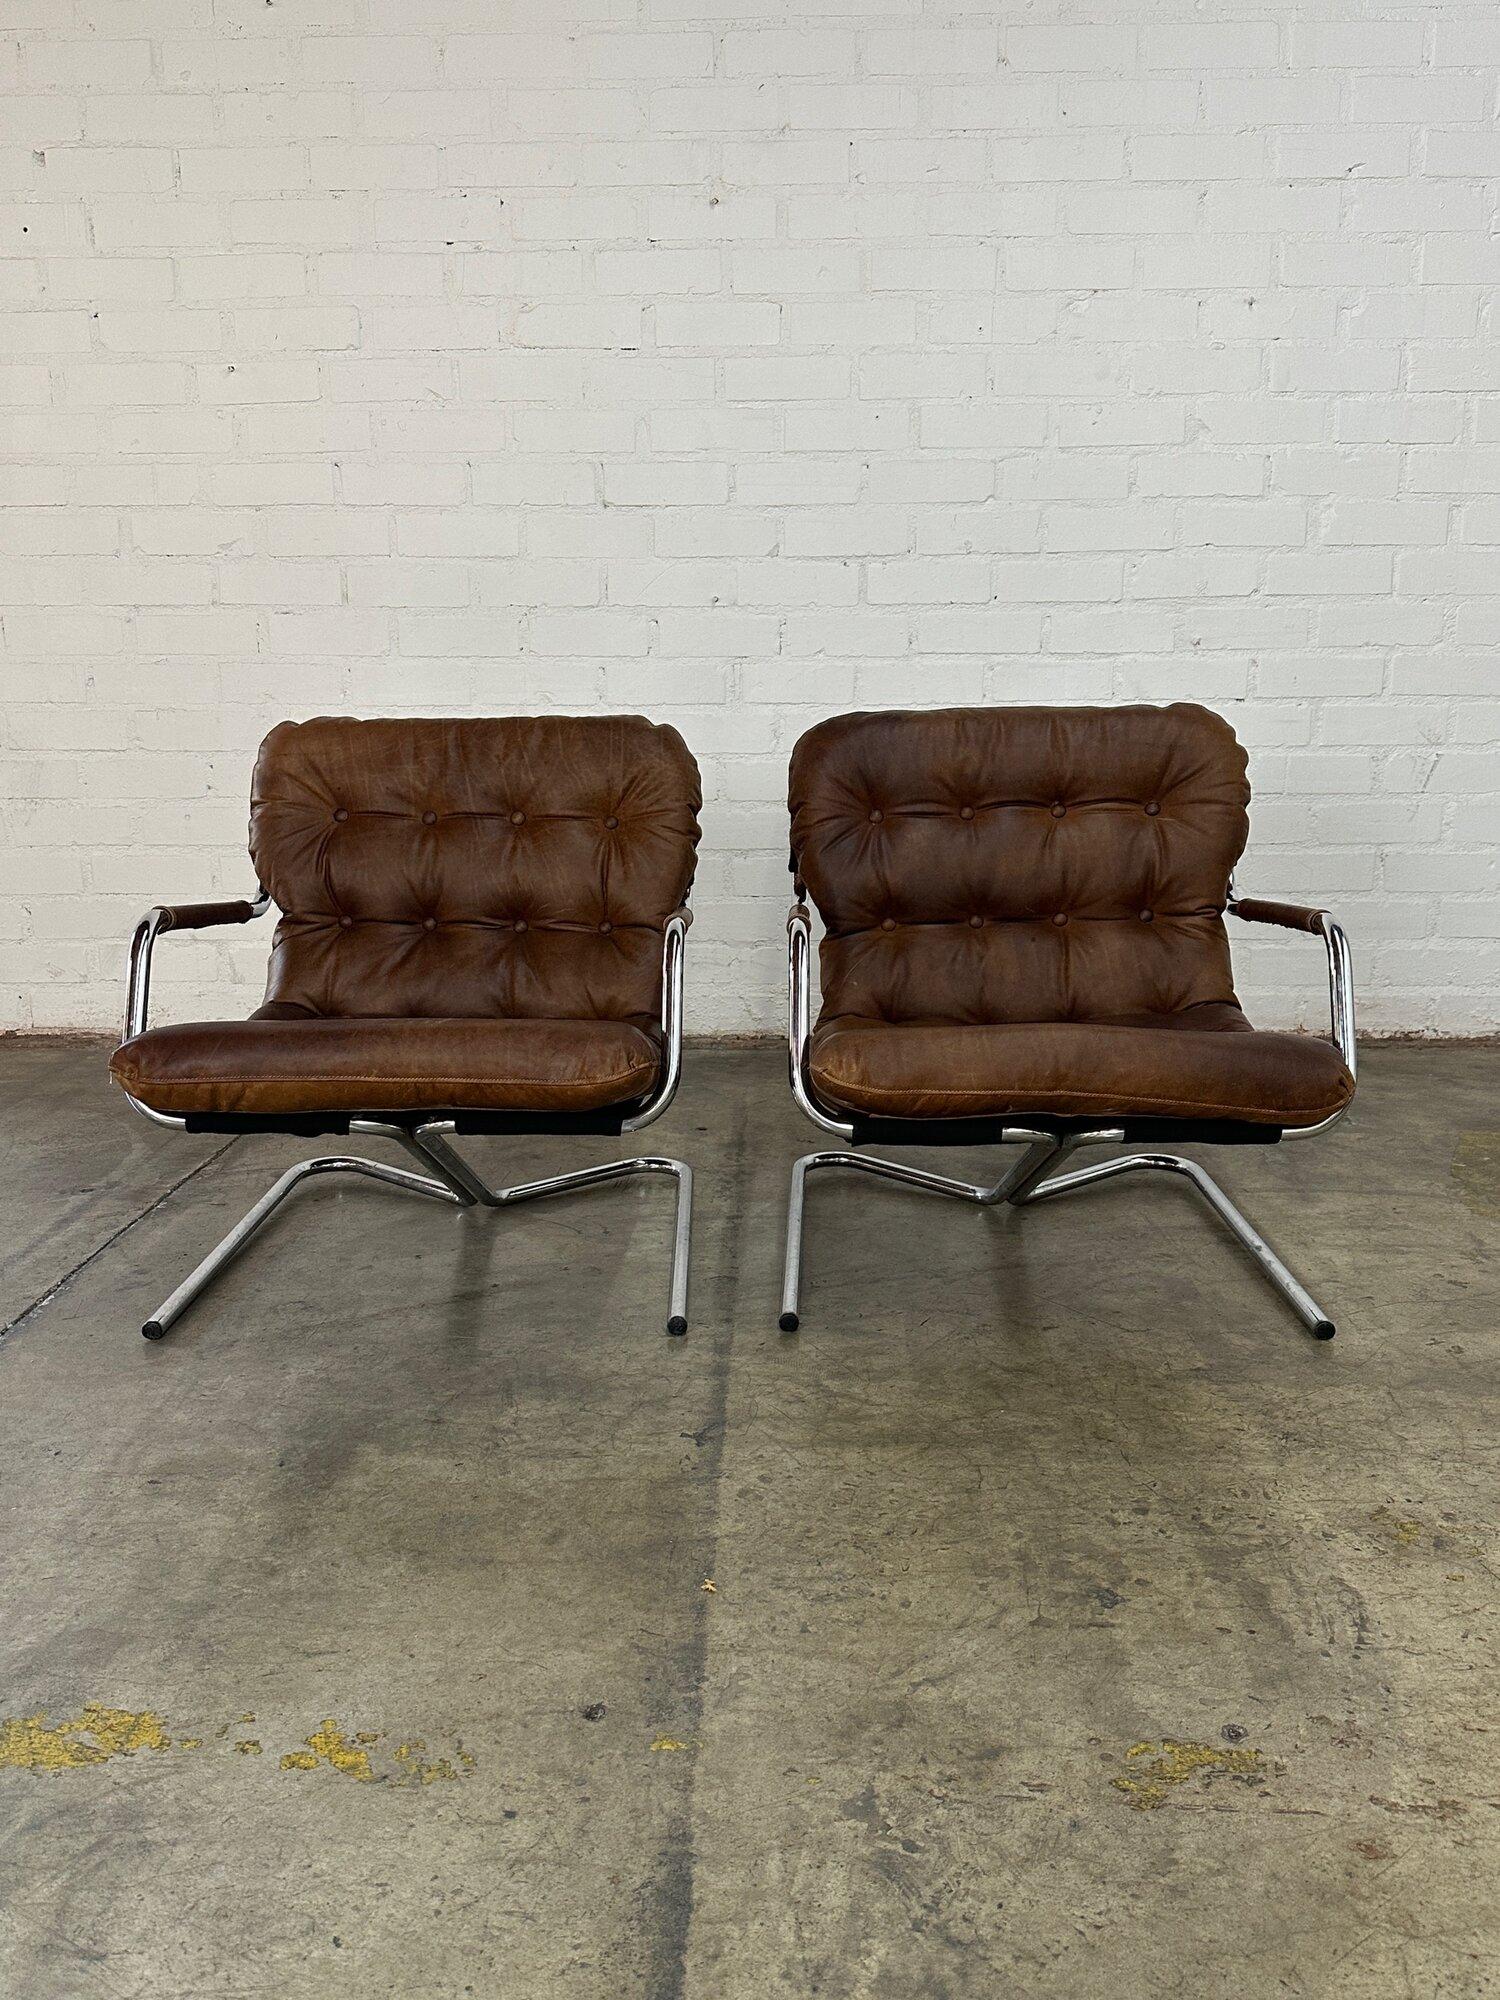 W26 D34 H27 SW24 SD20 SH15 AH20

Fully restored tubular chrome and leather lounge chairs. Each unit has fresh newly made slings , polished chrome, new foam and new distressed leather. Lounge chairs features a comfortable deep seating area, and a